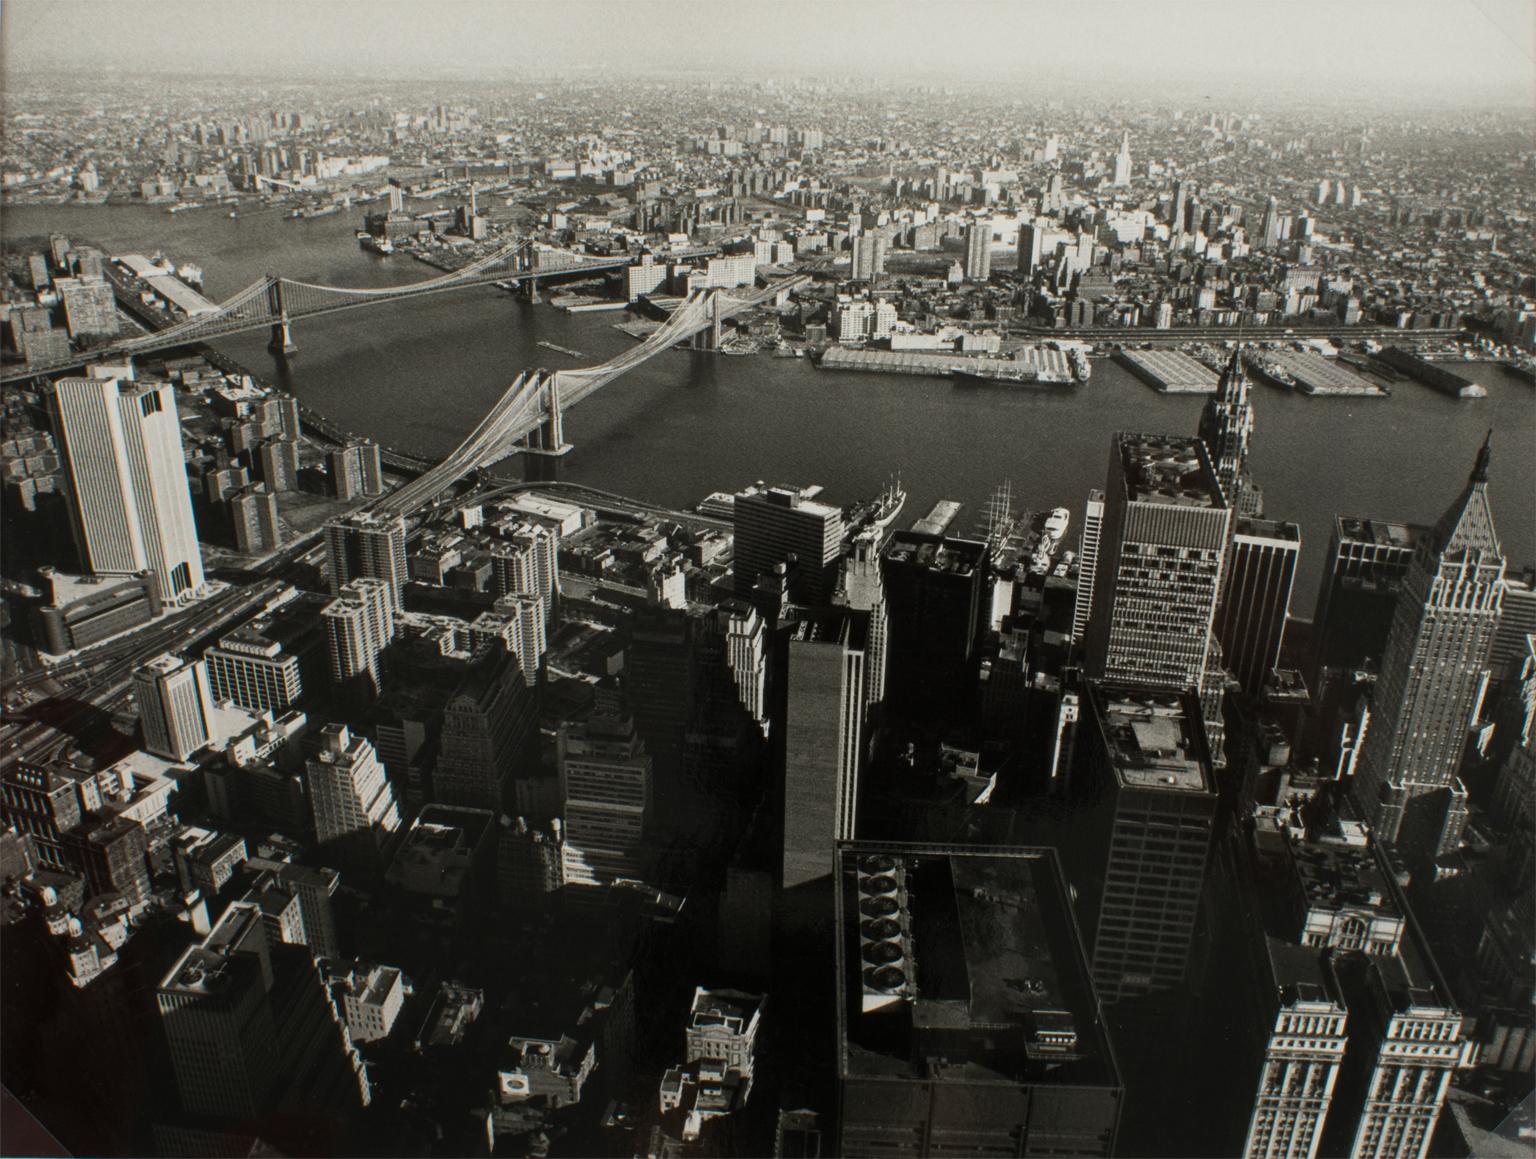 An original silver gelatin black and white photograph by Poly-Press, Bonn, Germany. A view of Manhattan and the East River, circa 1975.
Features:
Original silver gelatin print photography unframed.
Poly-Press (Press Agency), Bonn.
Photographer: